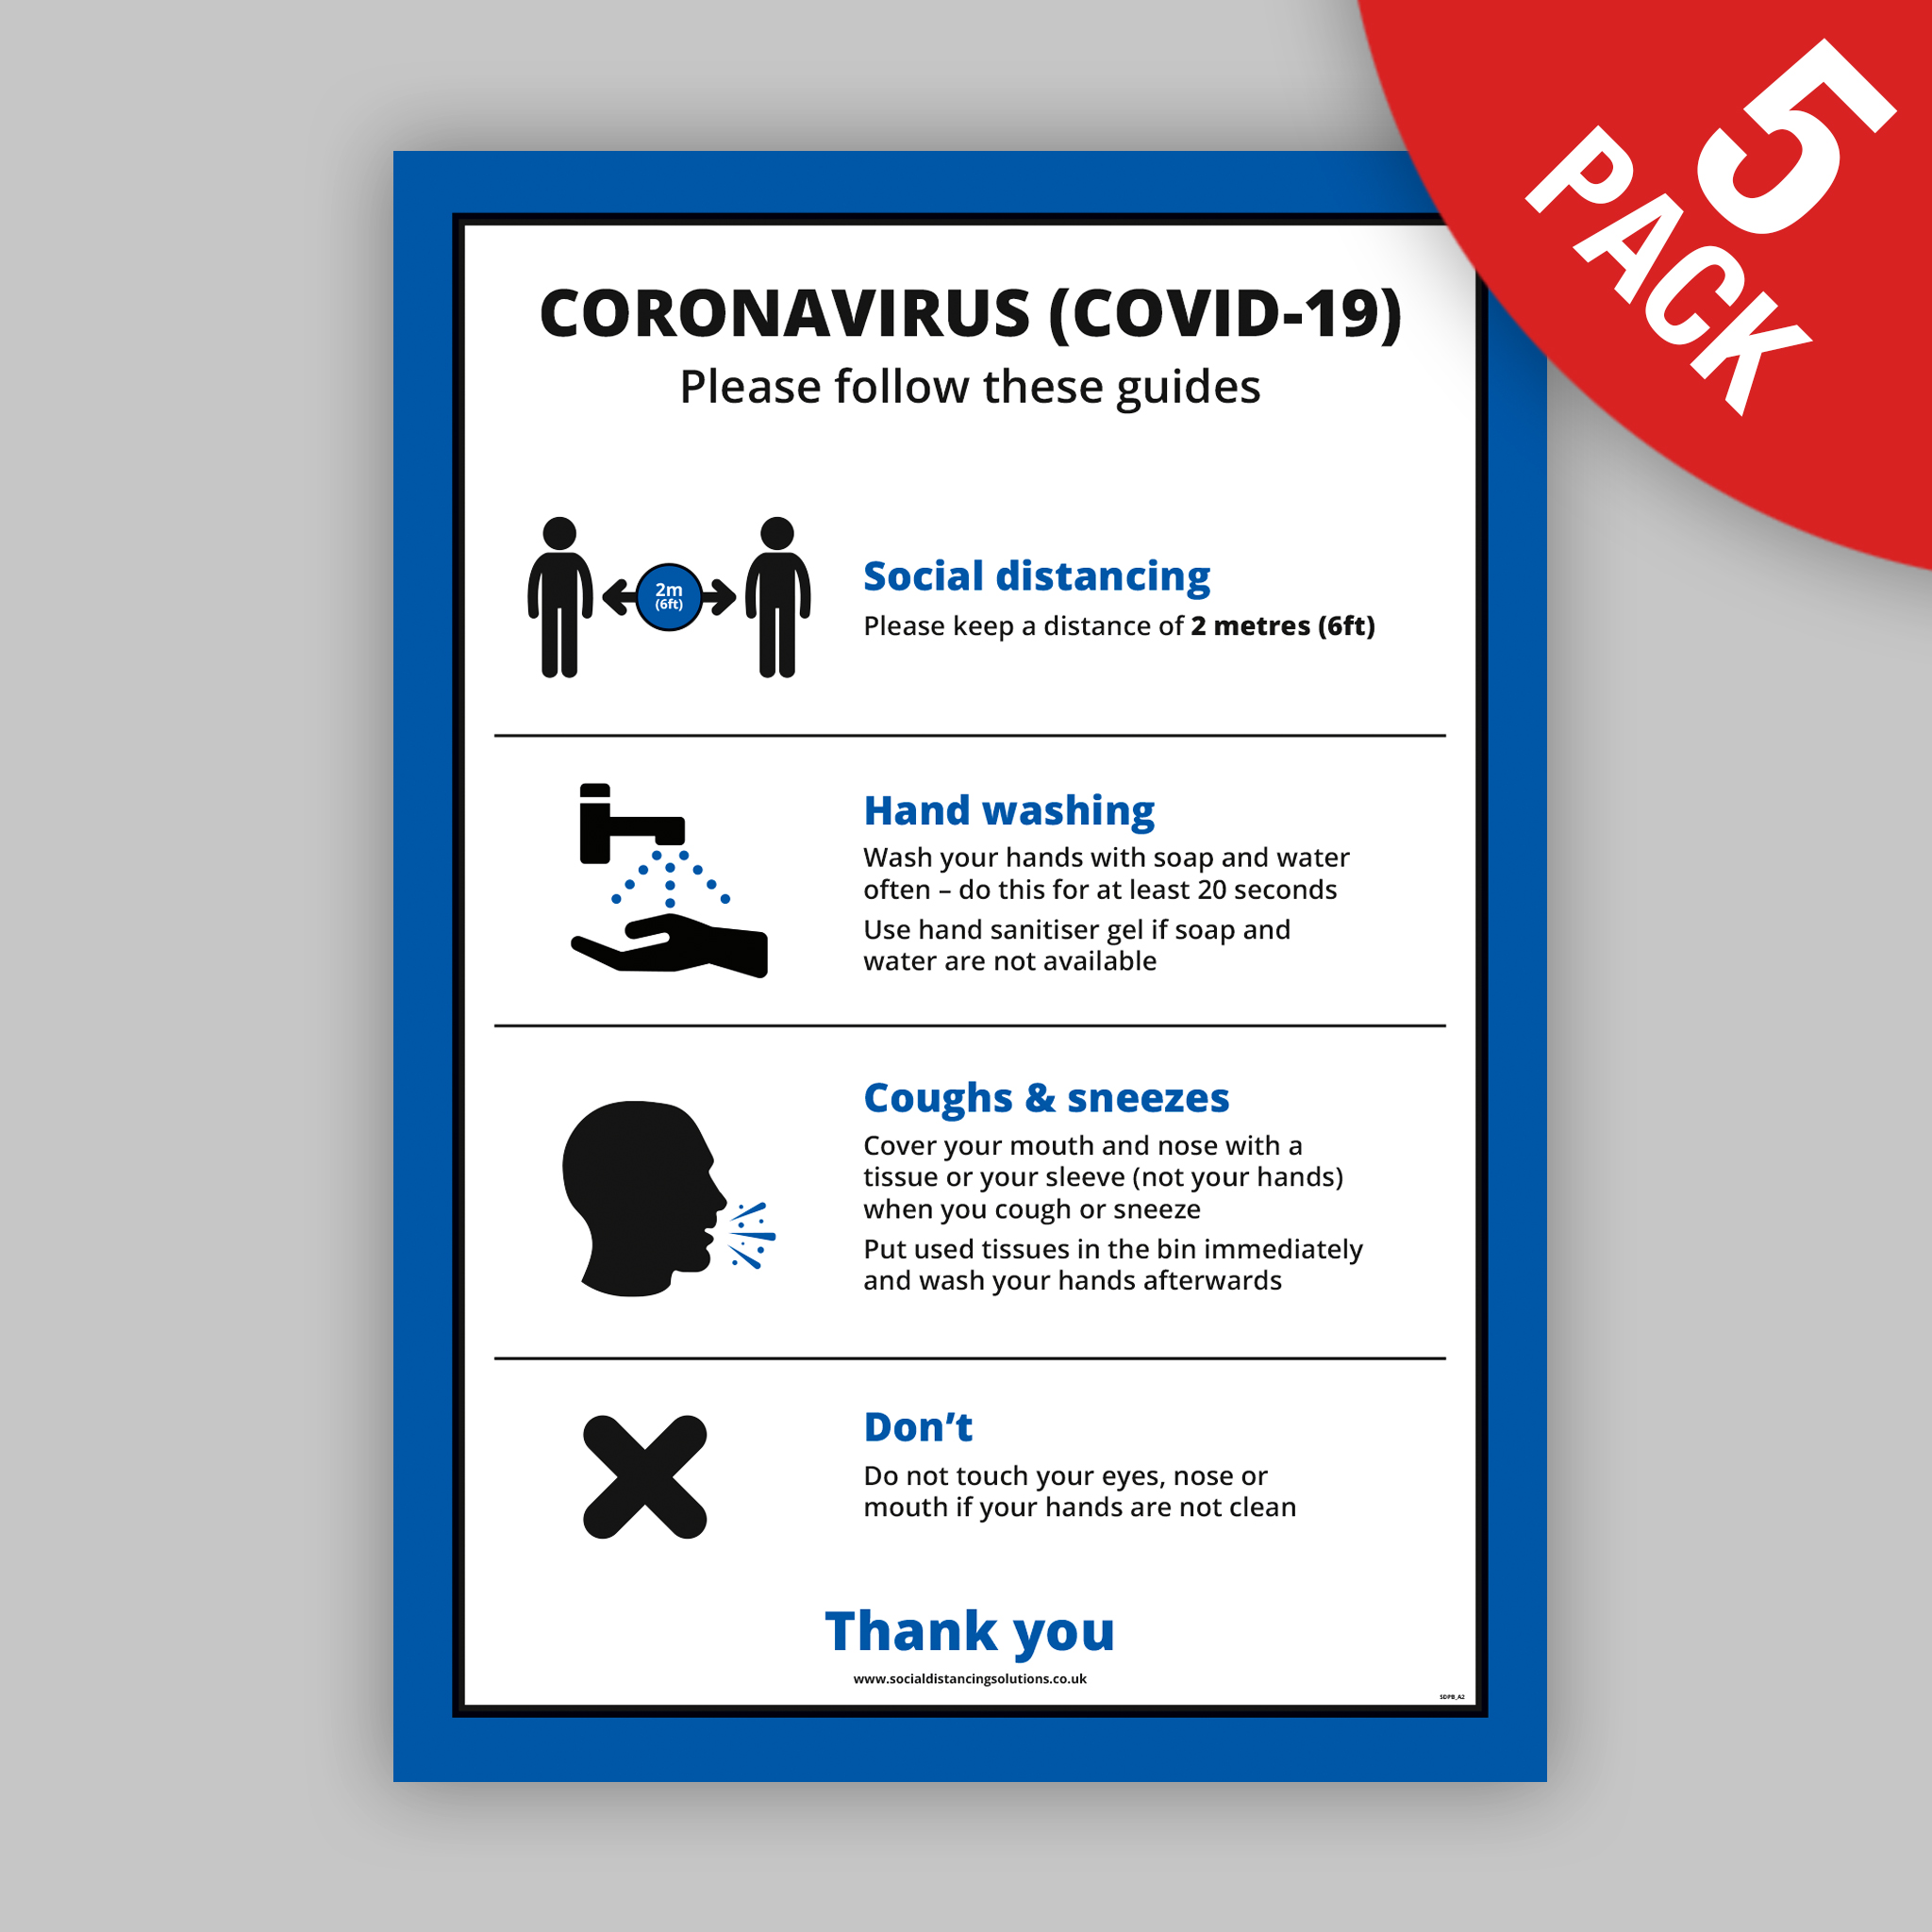 window safety poster pack of 4 wall Cov id social distancing 1 Metre 